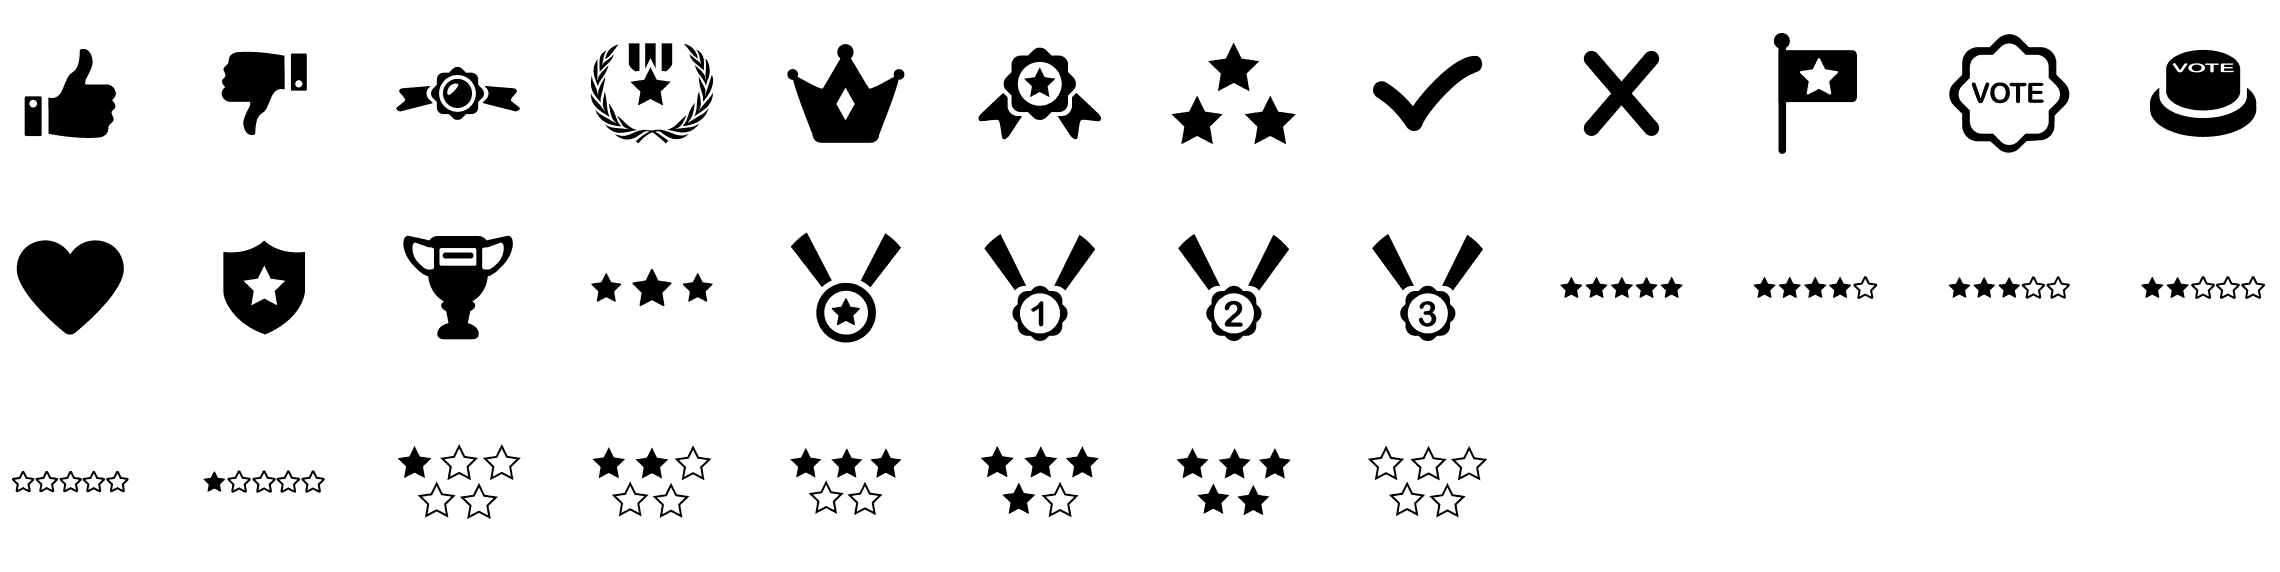 badges-and-votes-glyph-icons-preview